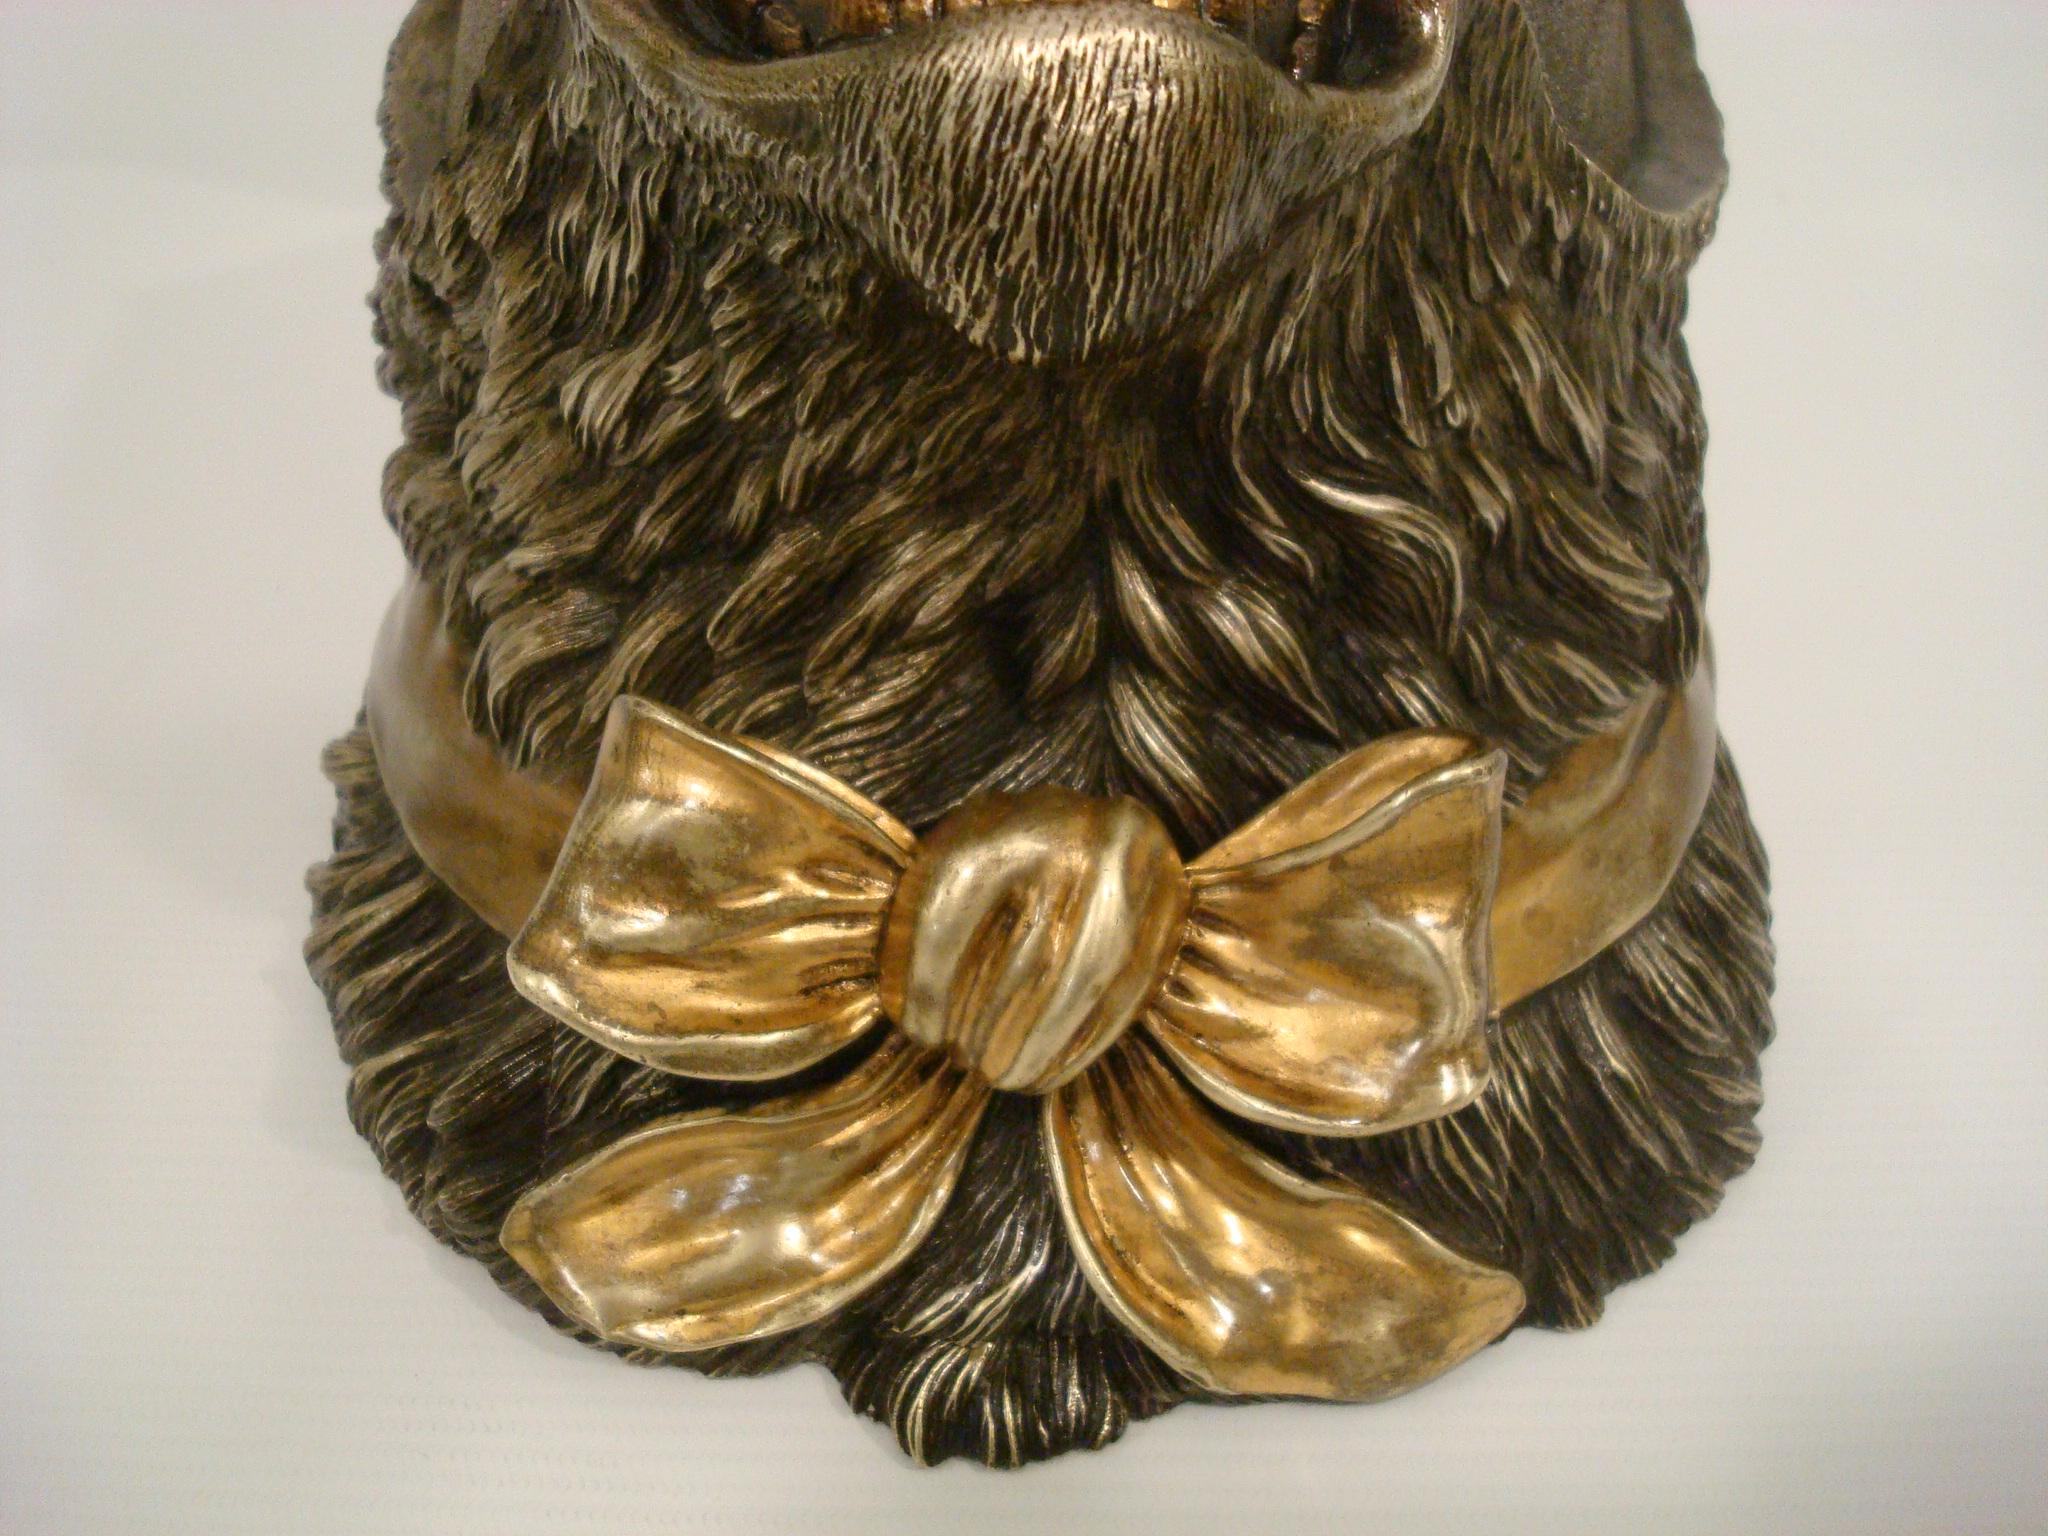 19th Century Novelty Bronze Cigars / Cigarettes Humidor Formed as a Cat's Head Sculpture For Sale